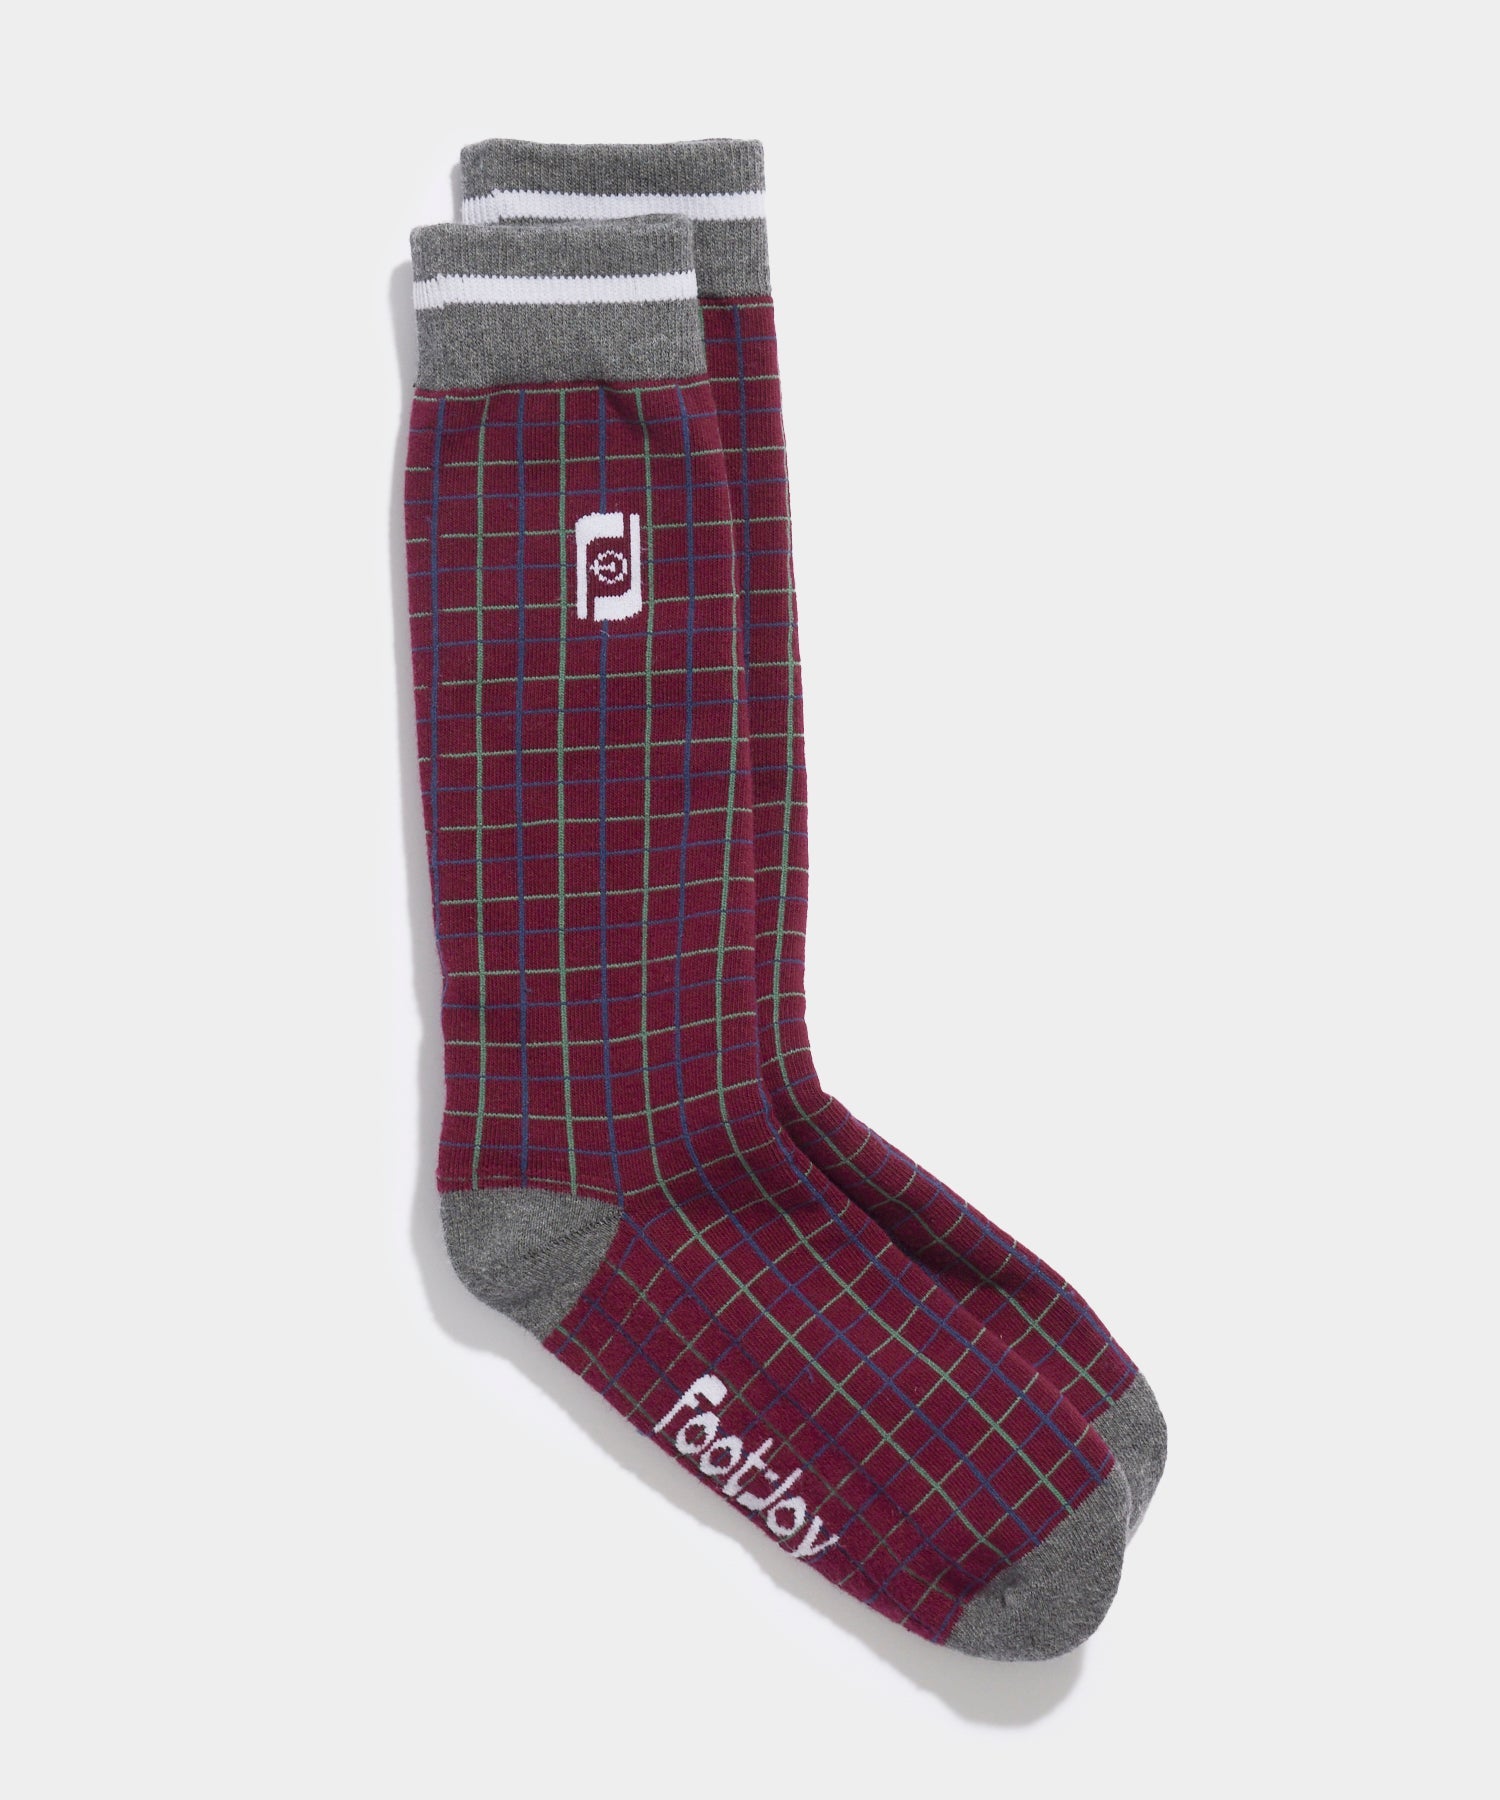 Todd Snyder x Footjoy Knit Golf Sock Wineberry Plaid